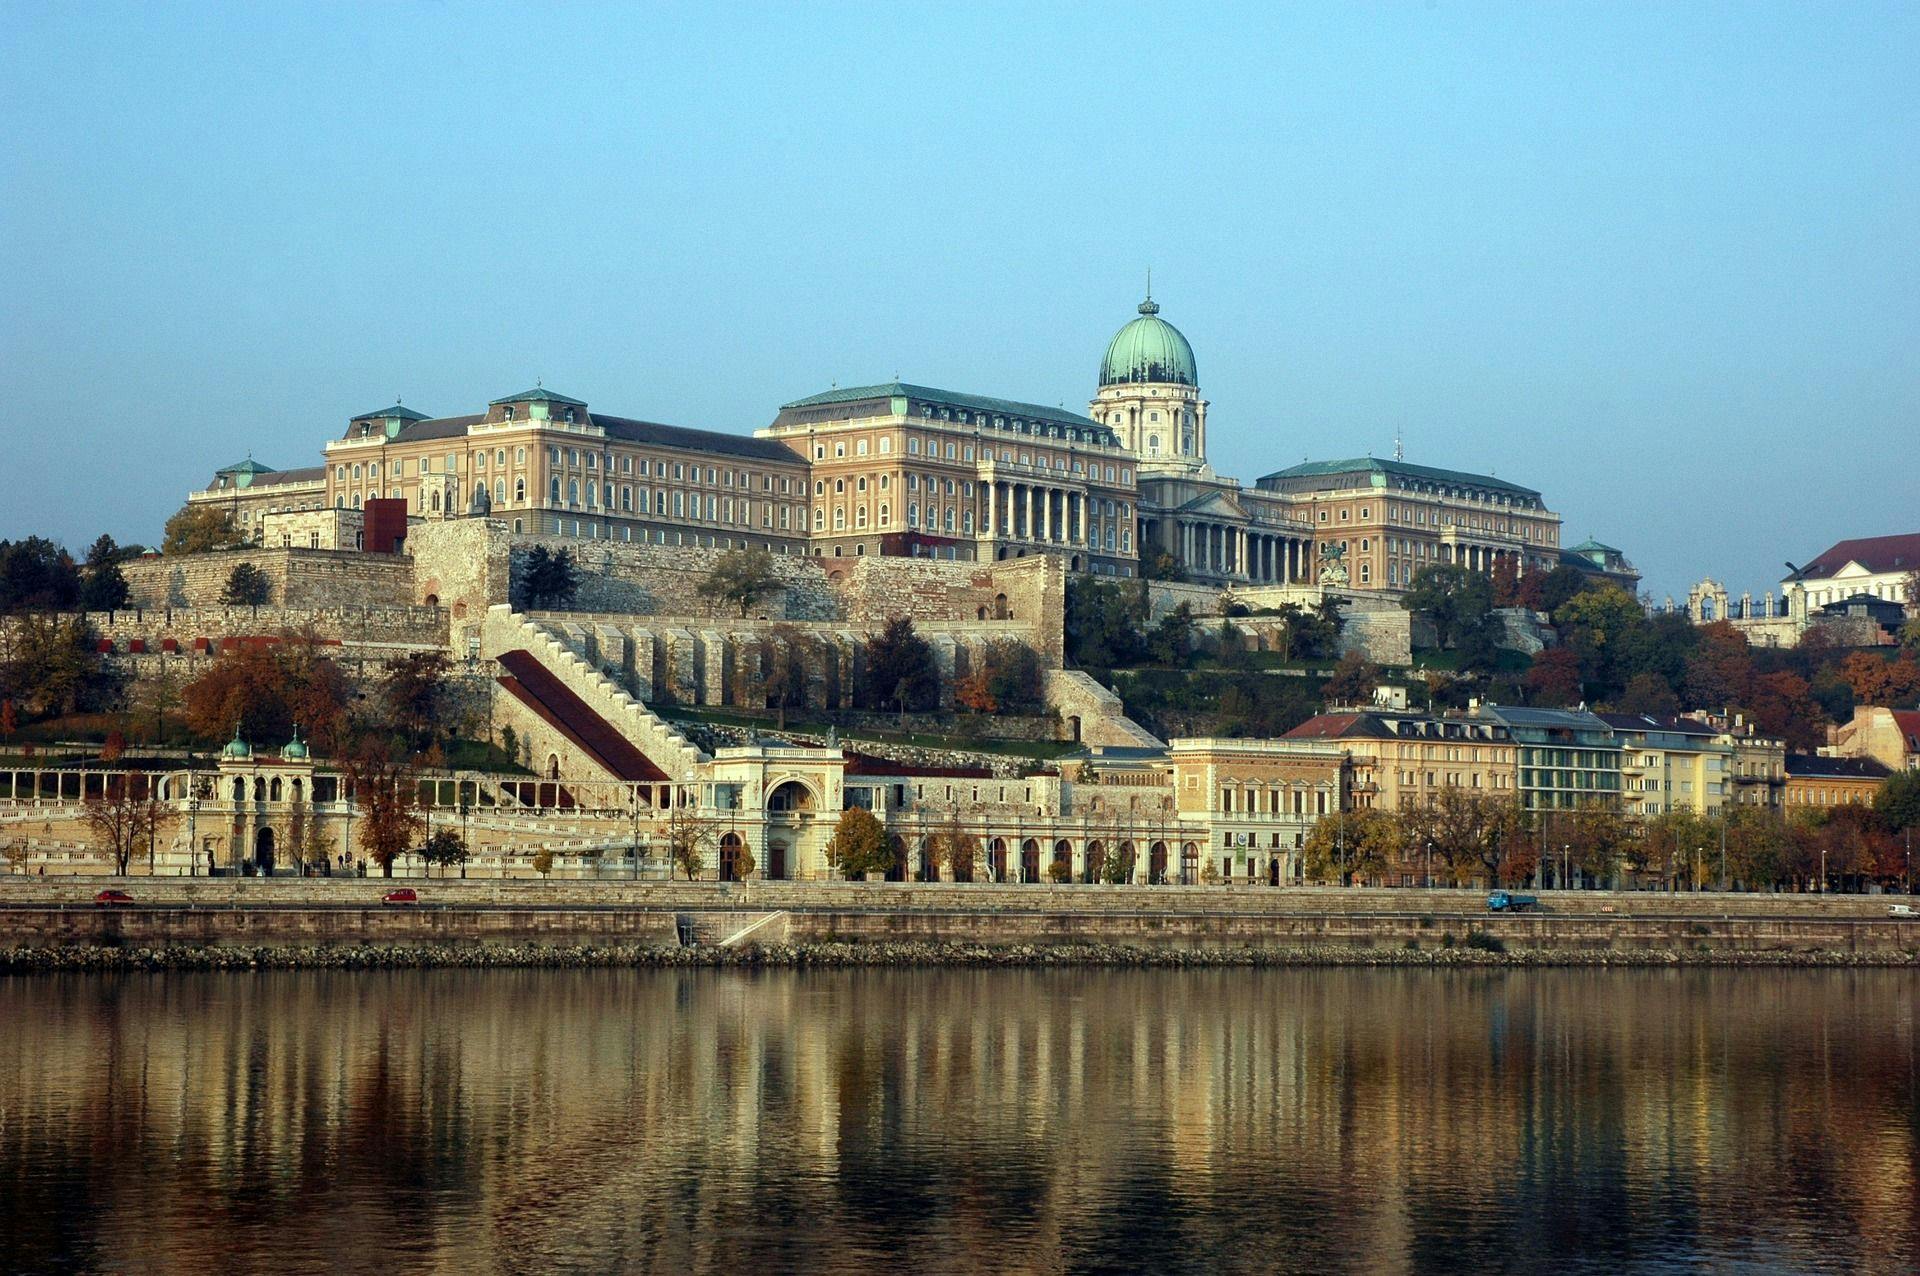 3-hour tour of Buda Castle with a historian